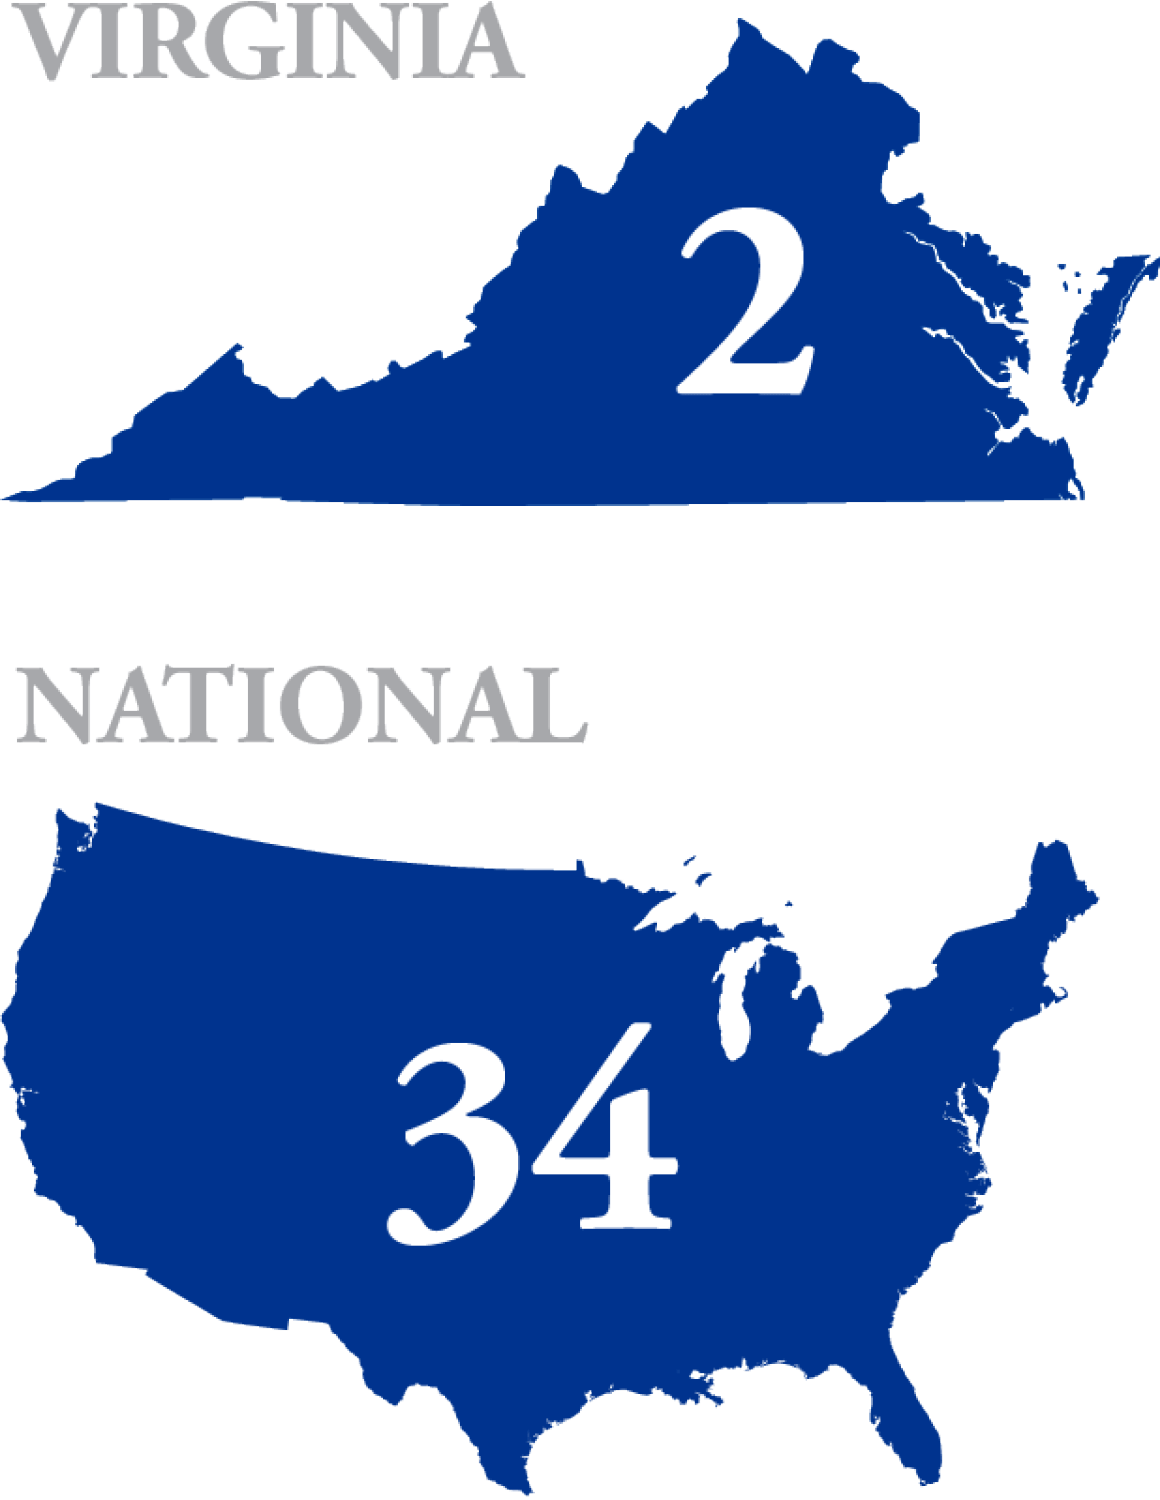 Maps of Virginia with the number 2 and the United States with the number 34